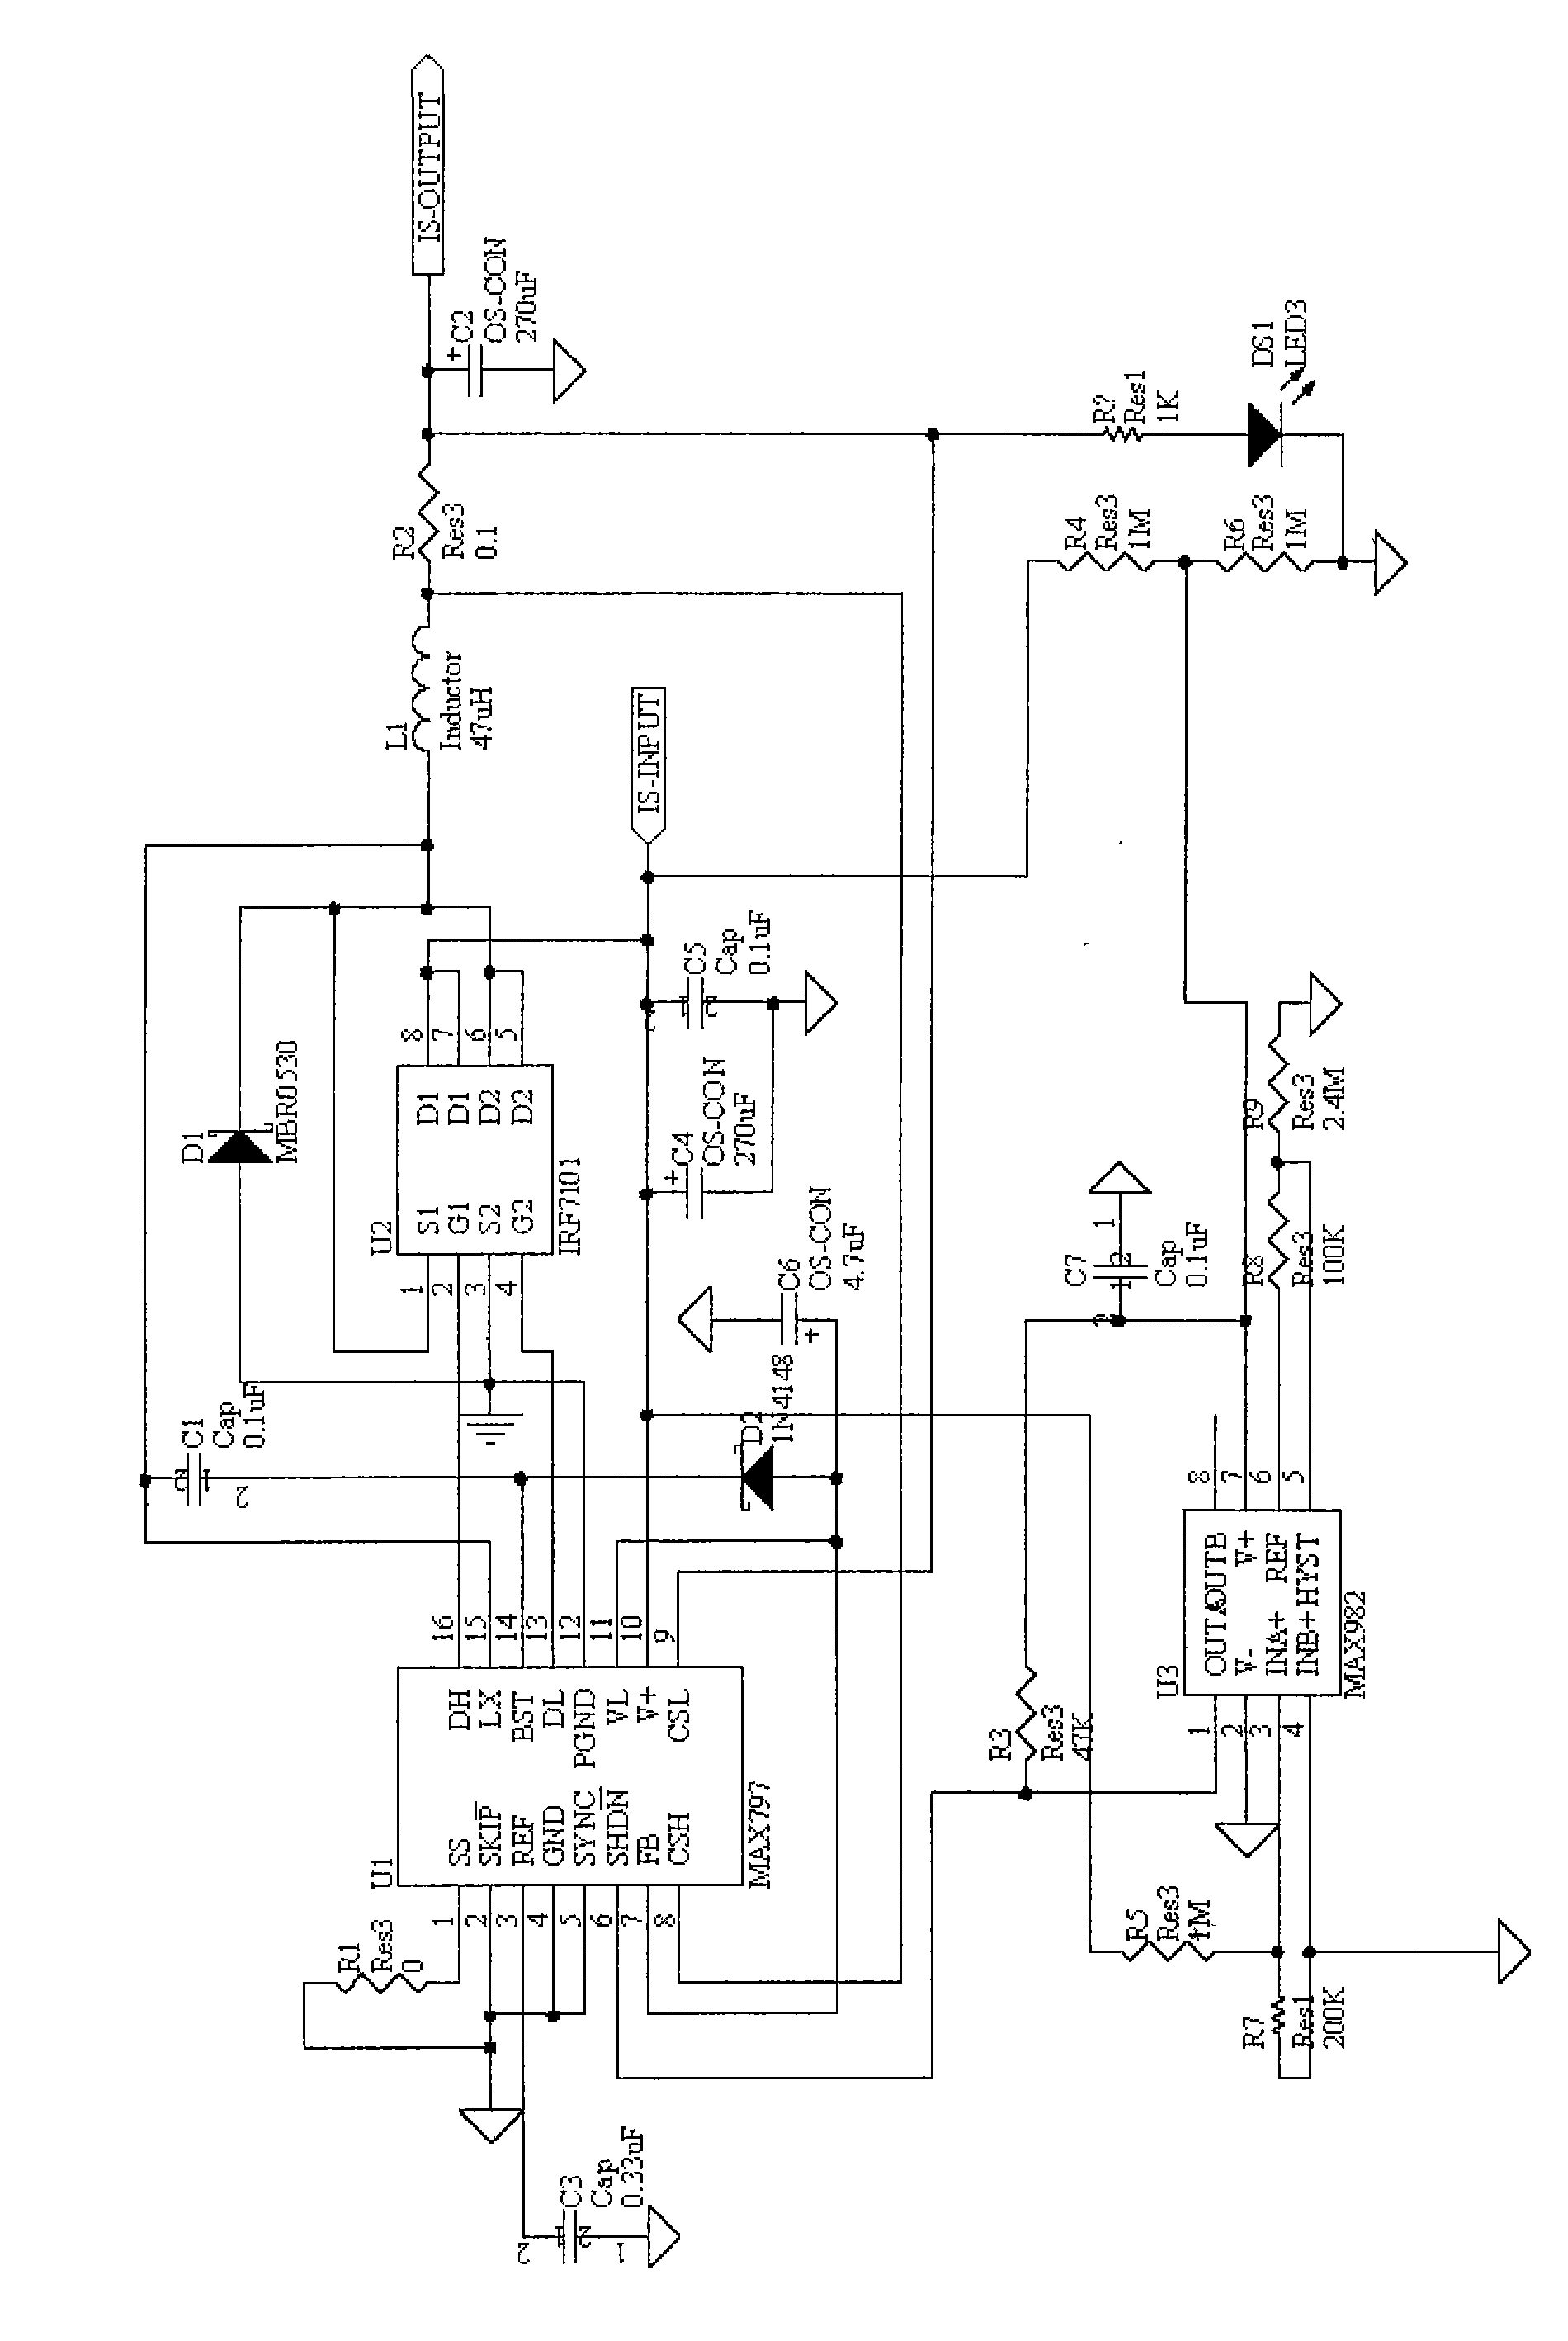 Radio acceleration strain temperature data collecting system based on solar energy